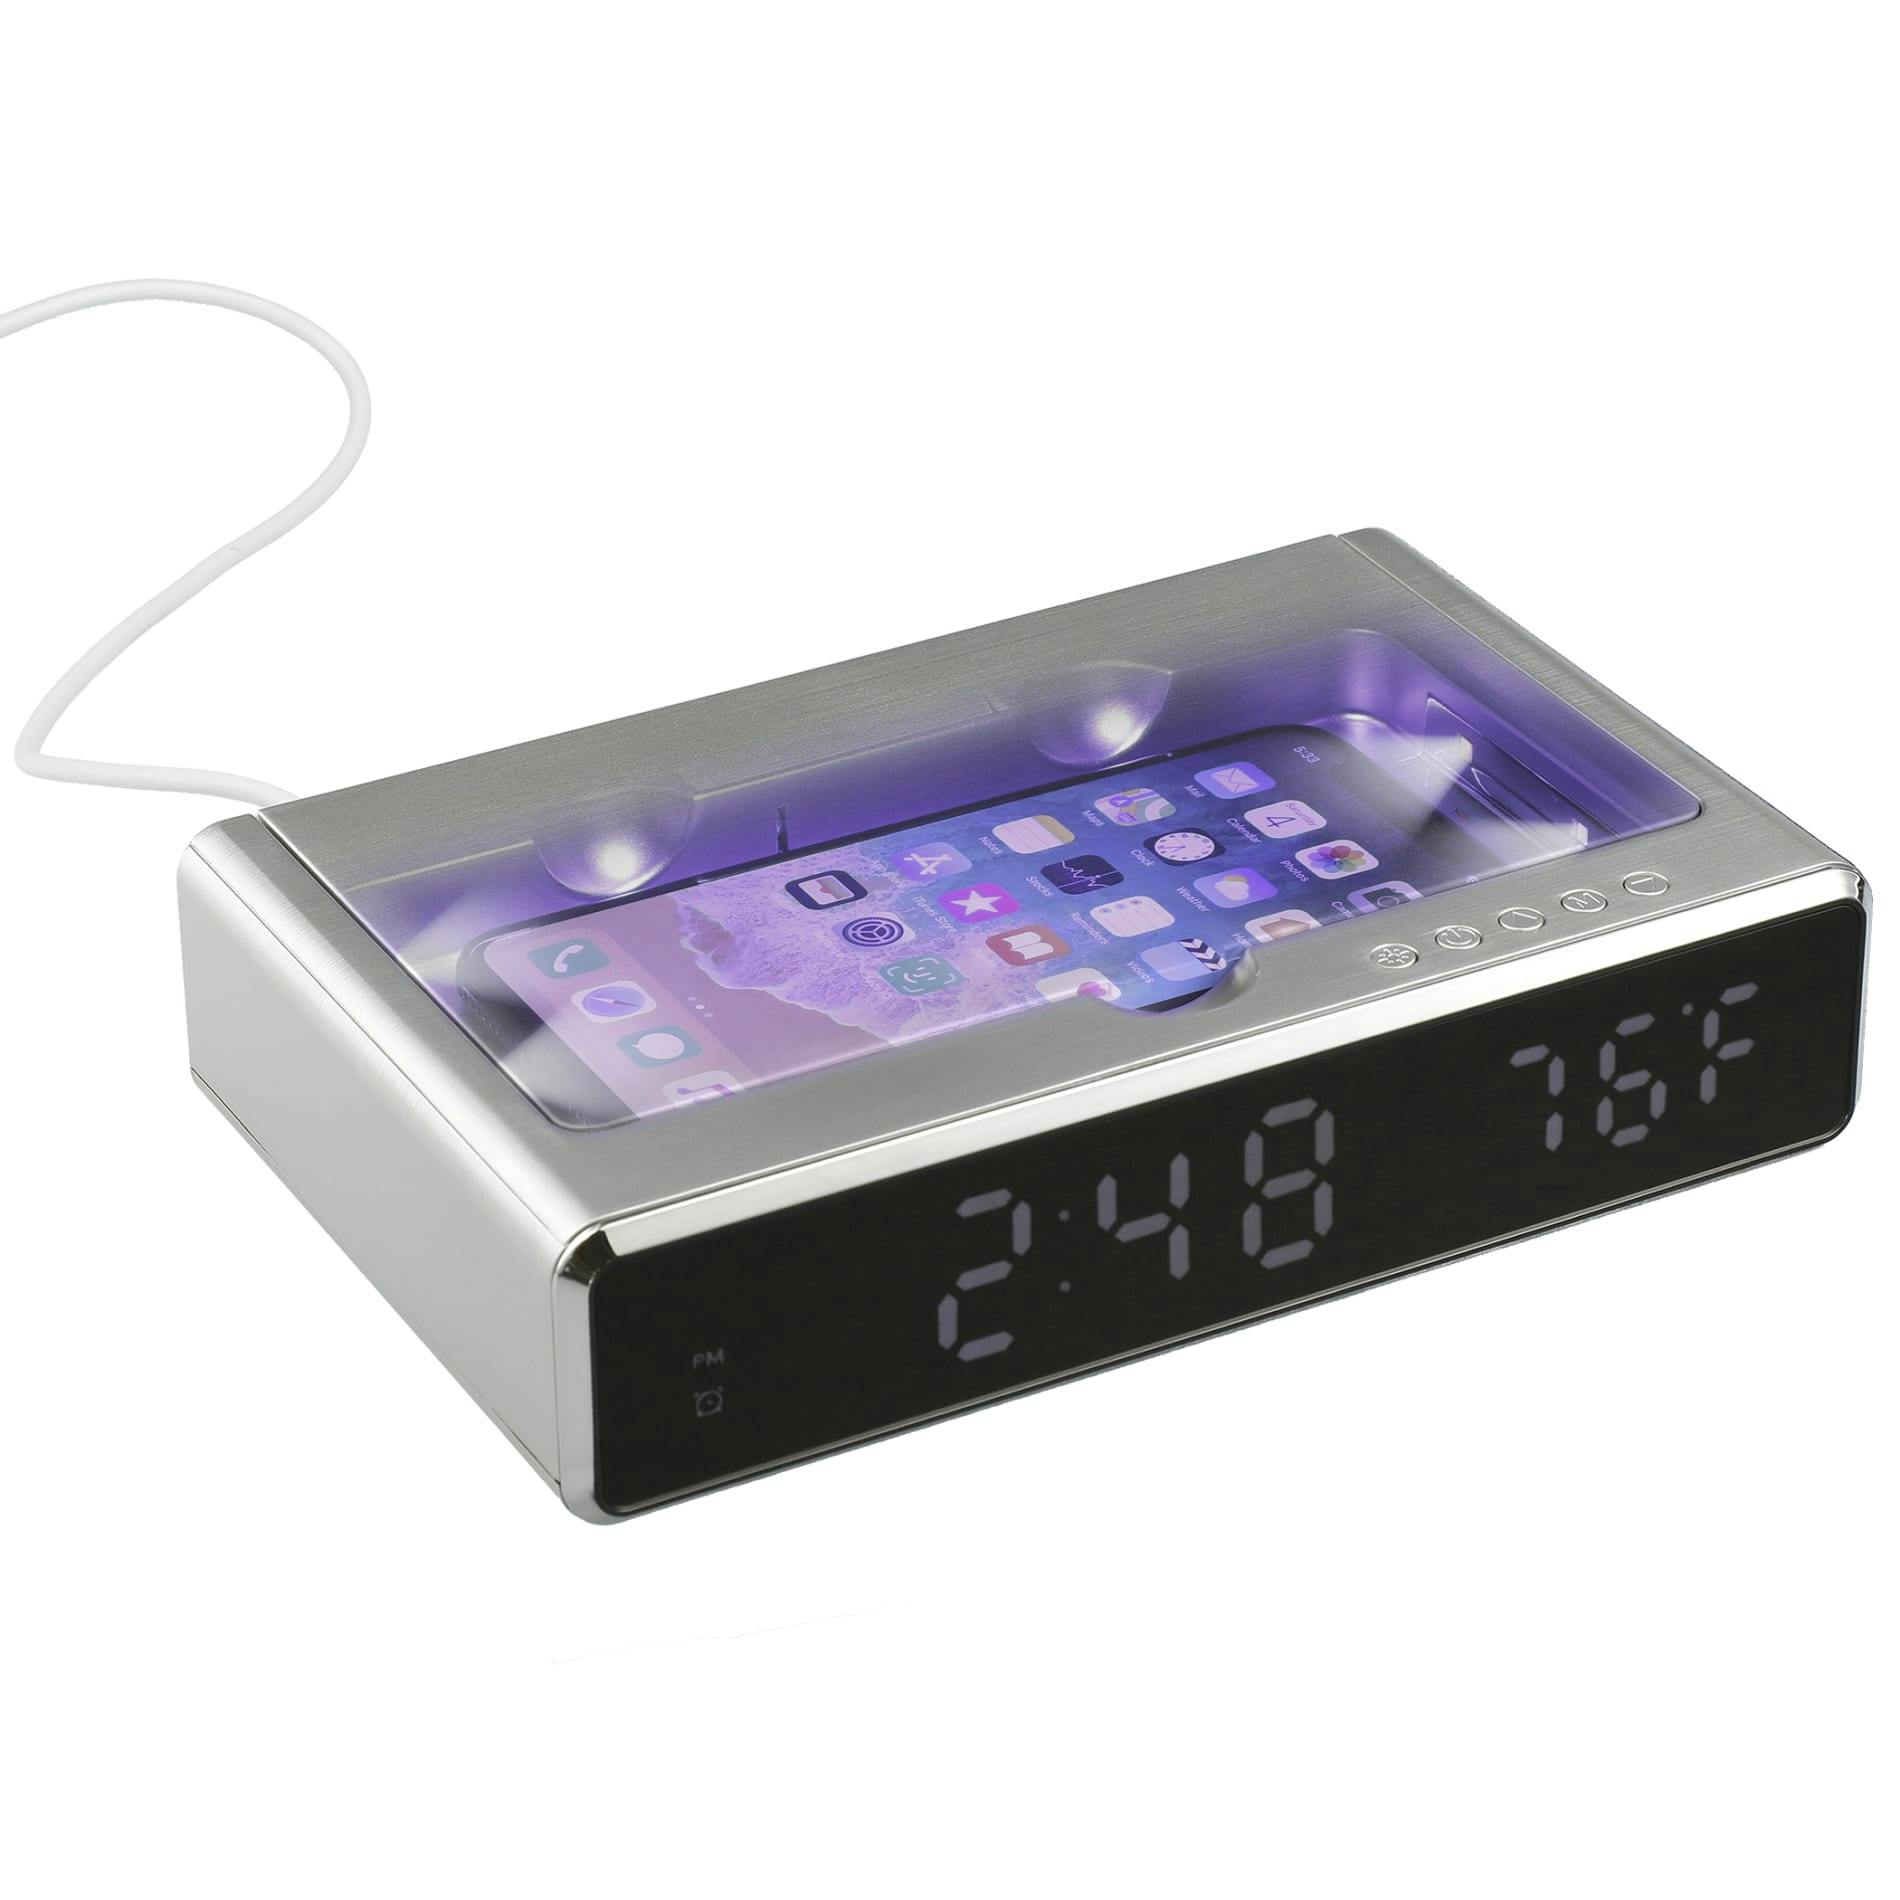 UV Sanitizer Desk Clock with Wireless Charging - additional Image 3